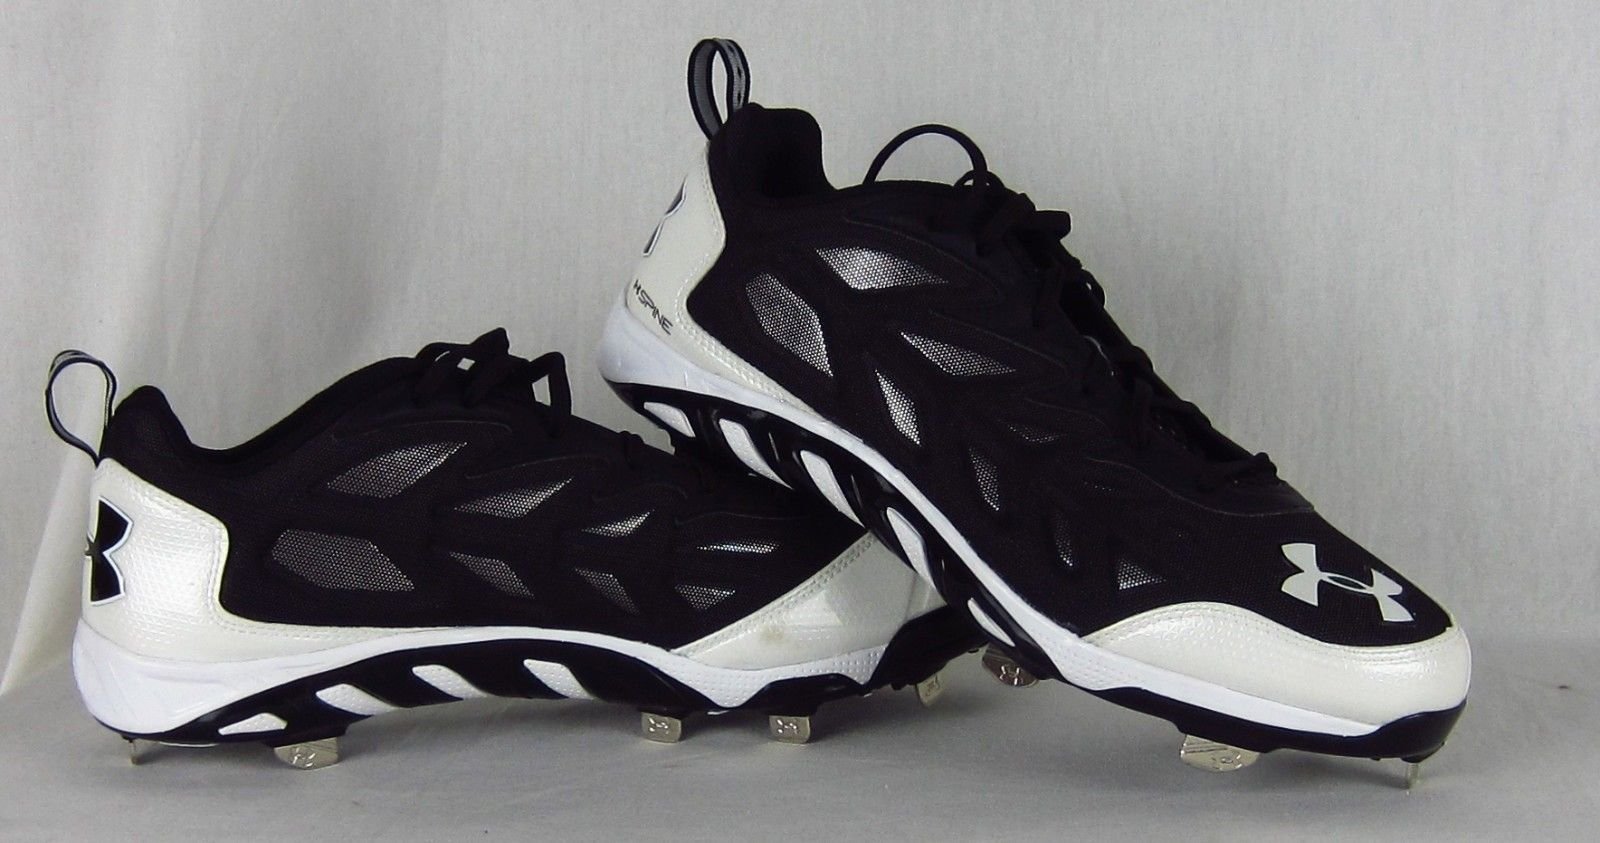 under armour spine cleats baseball